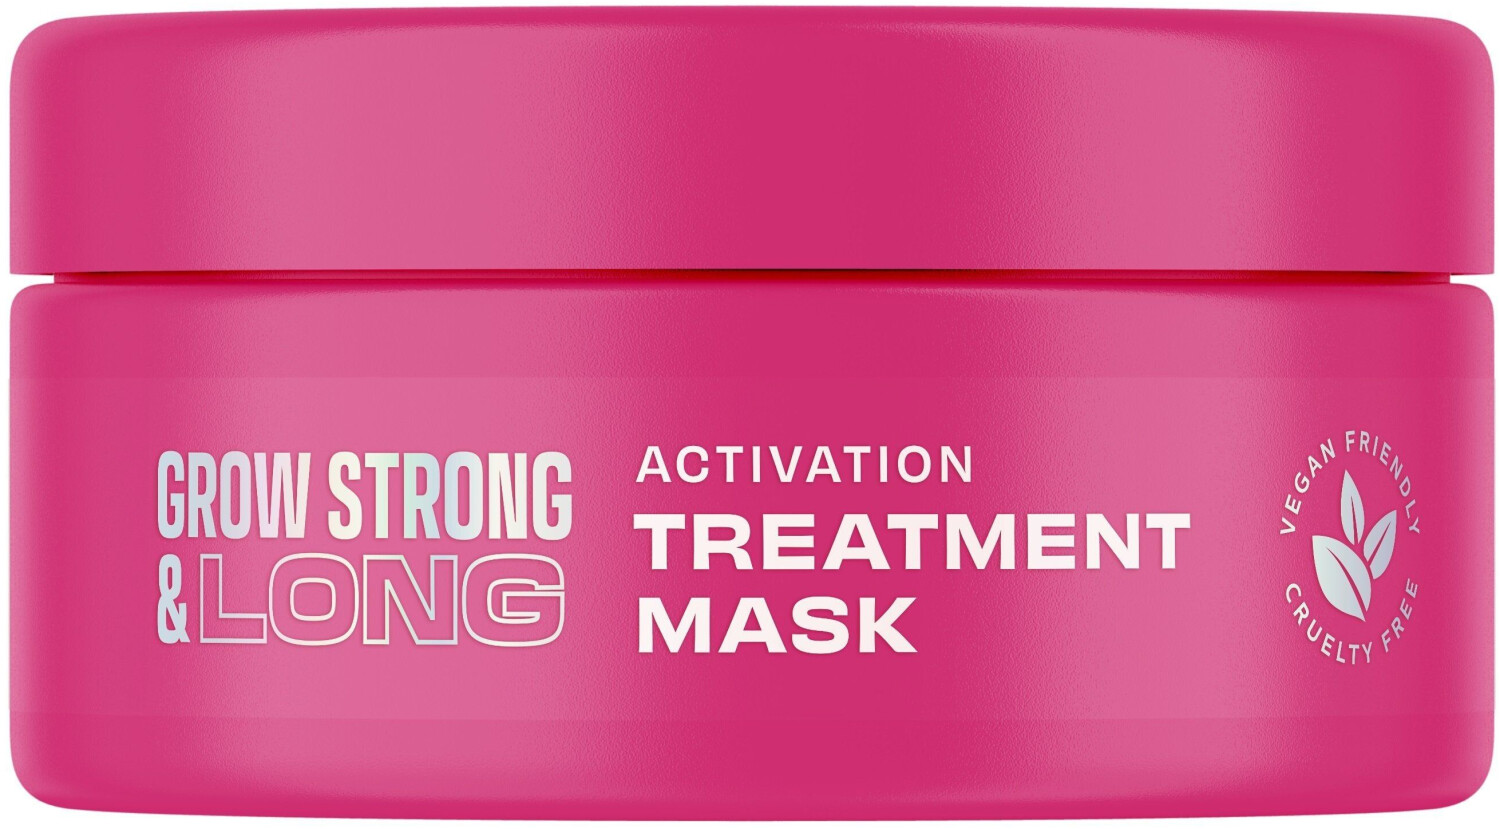 Photos - Hair Product Lee Stafford Grow Strong & Long Activation Treatment Mask (20 